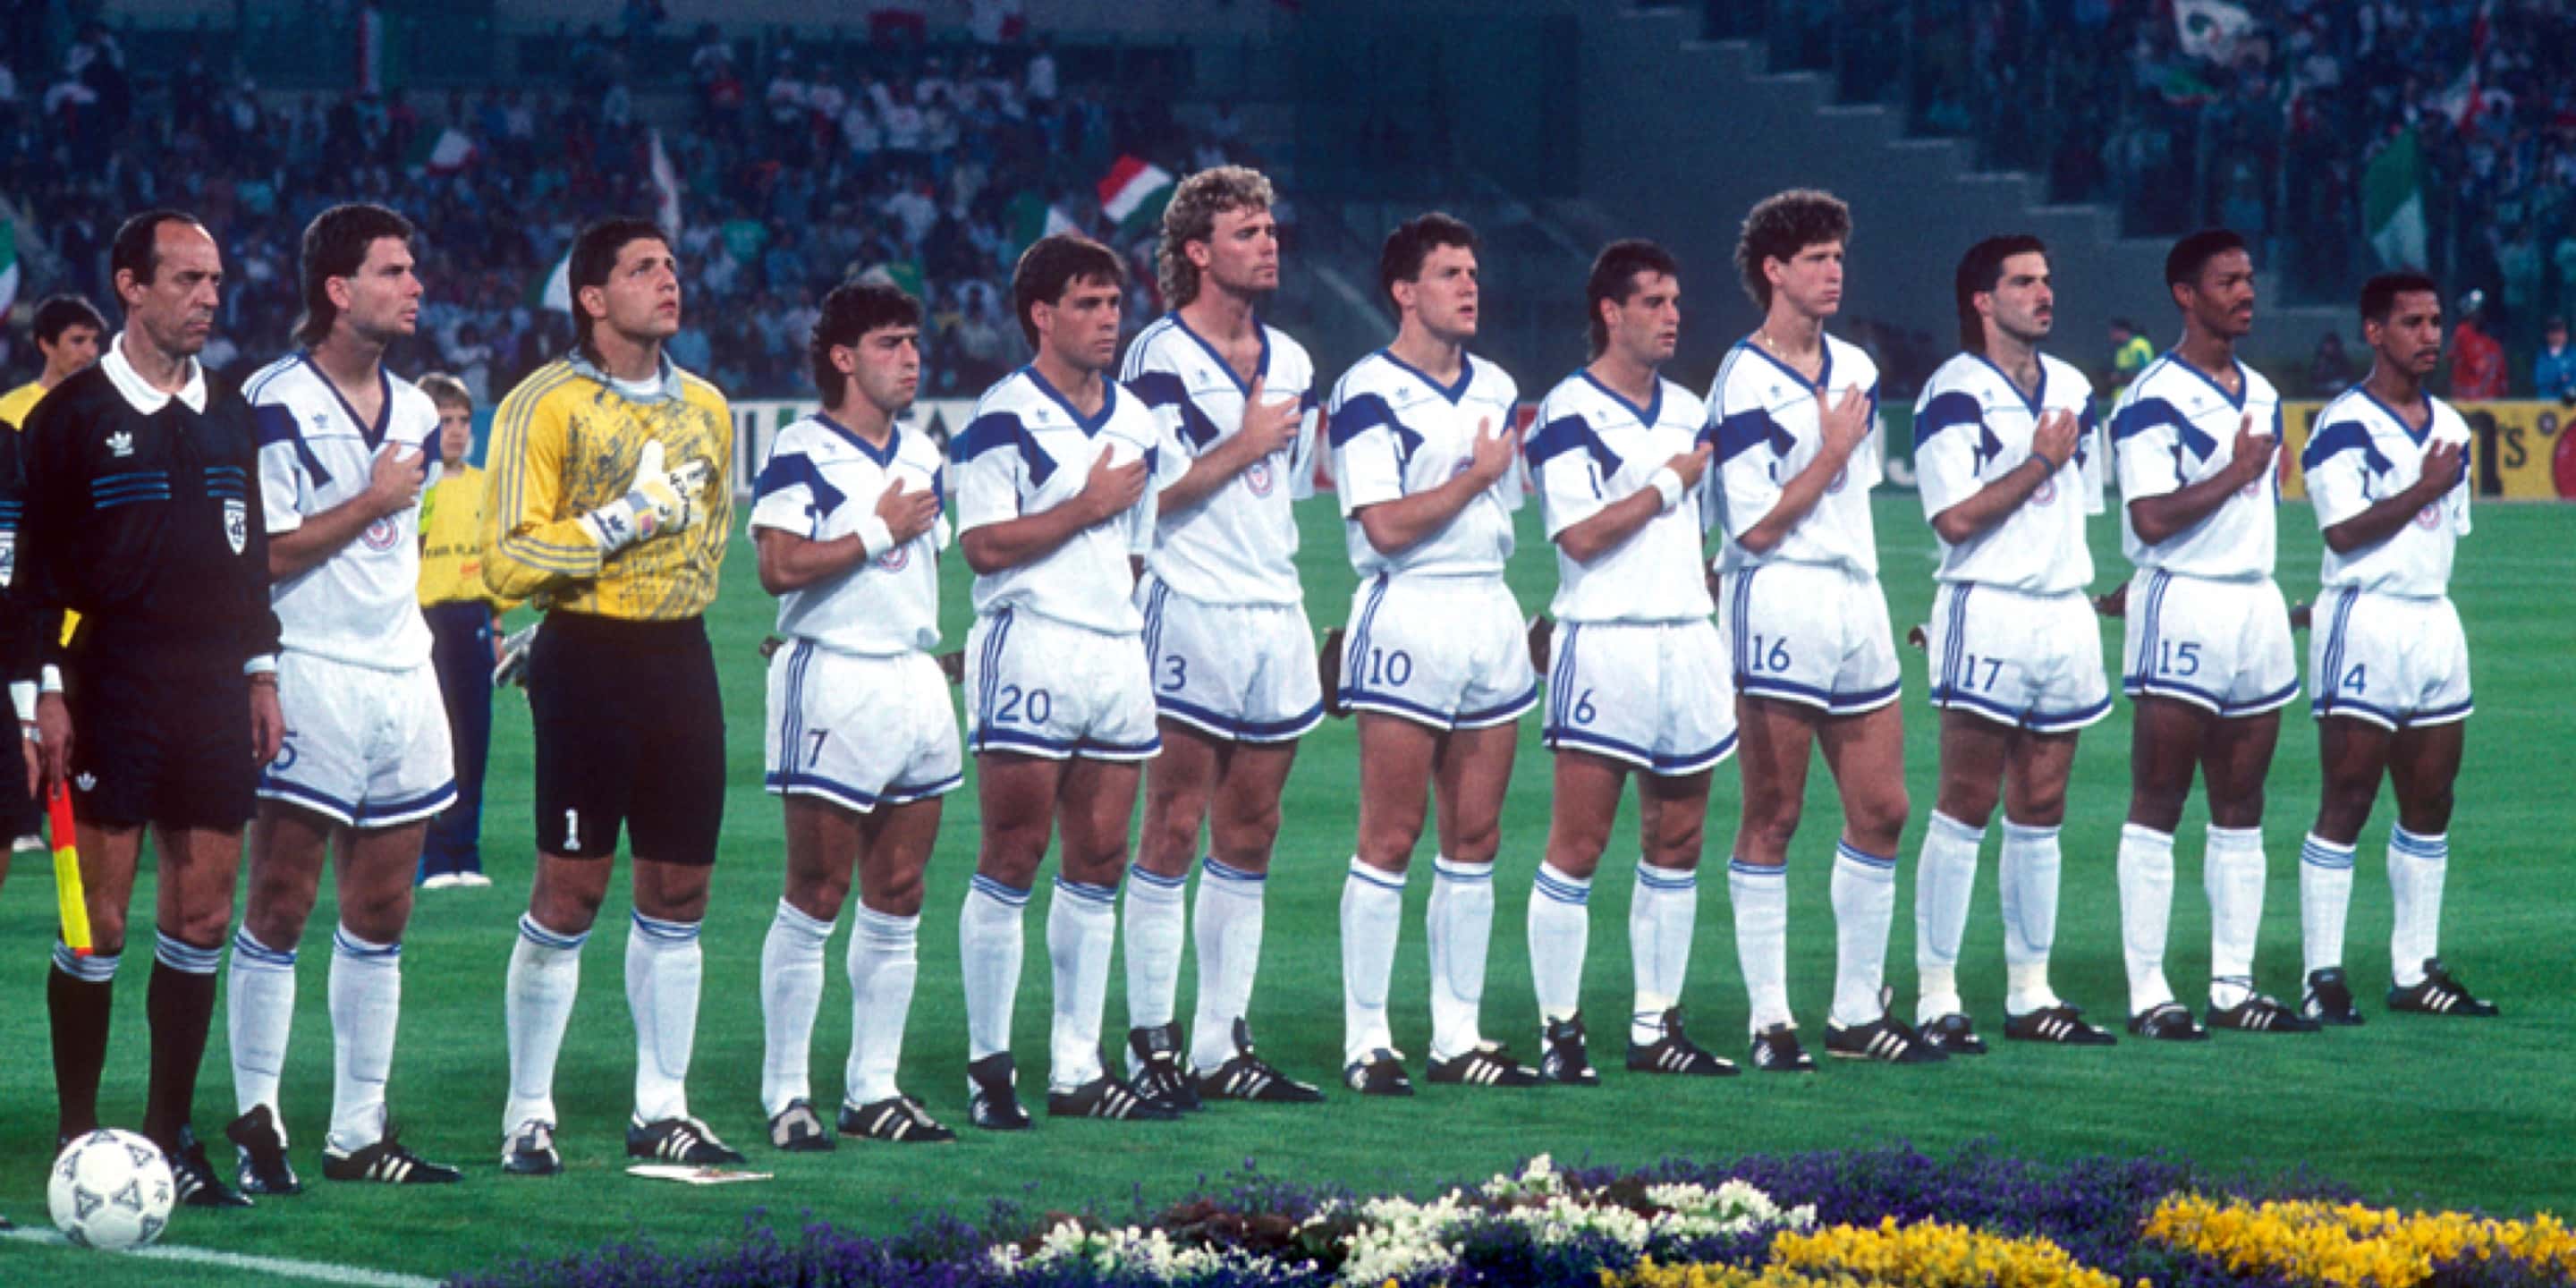 Tampa Bays Rowdies team group in 1981.